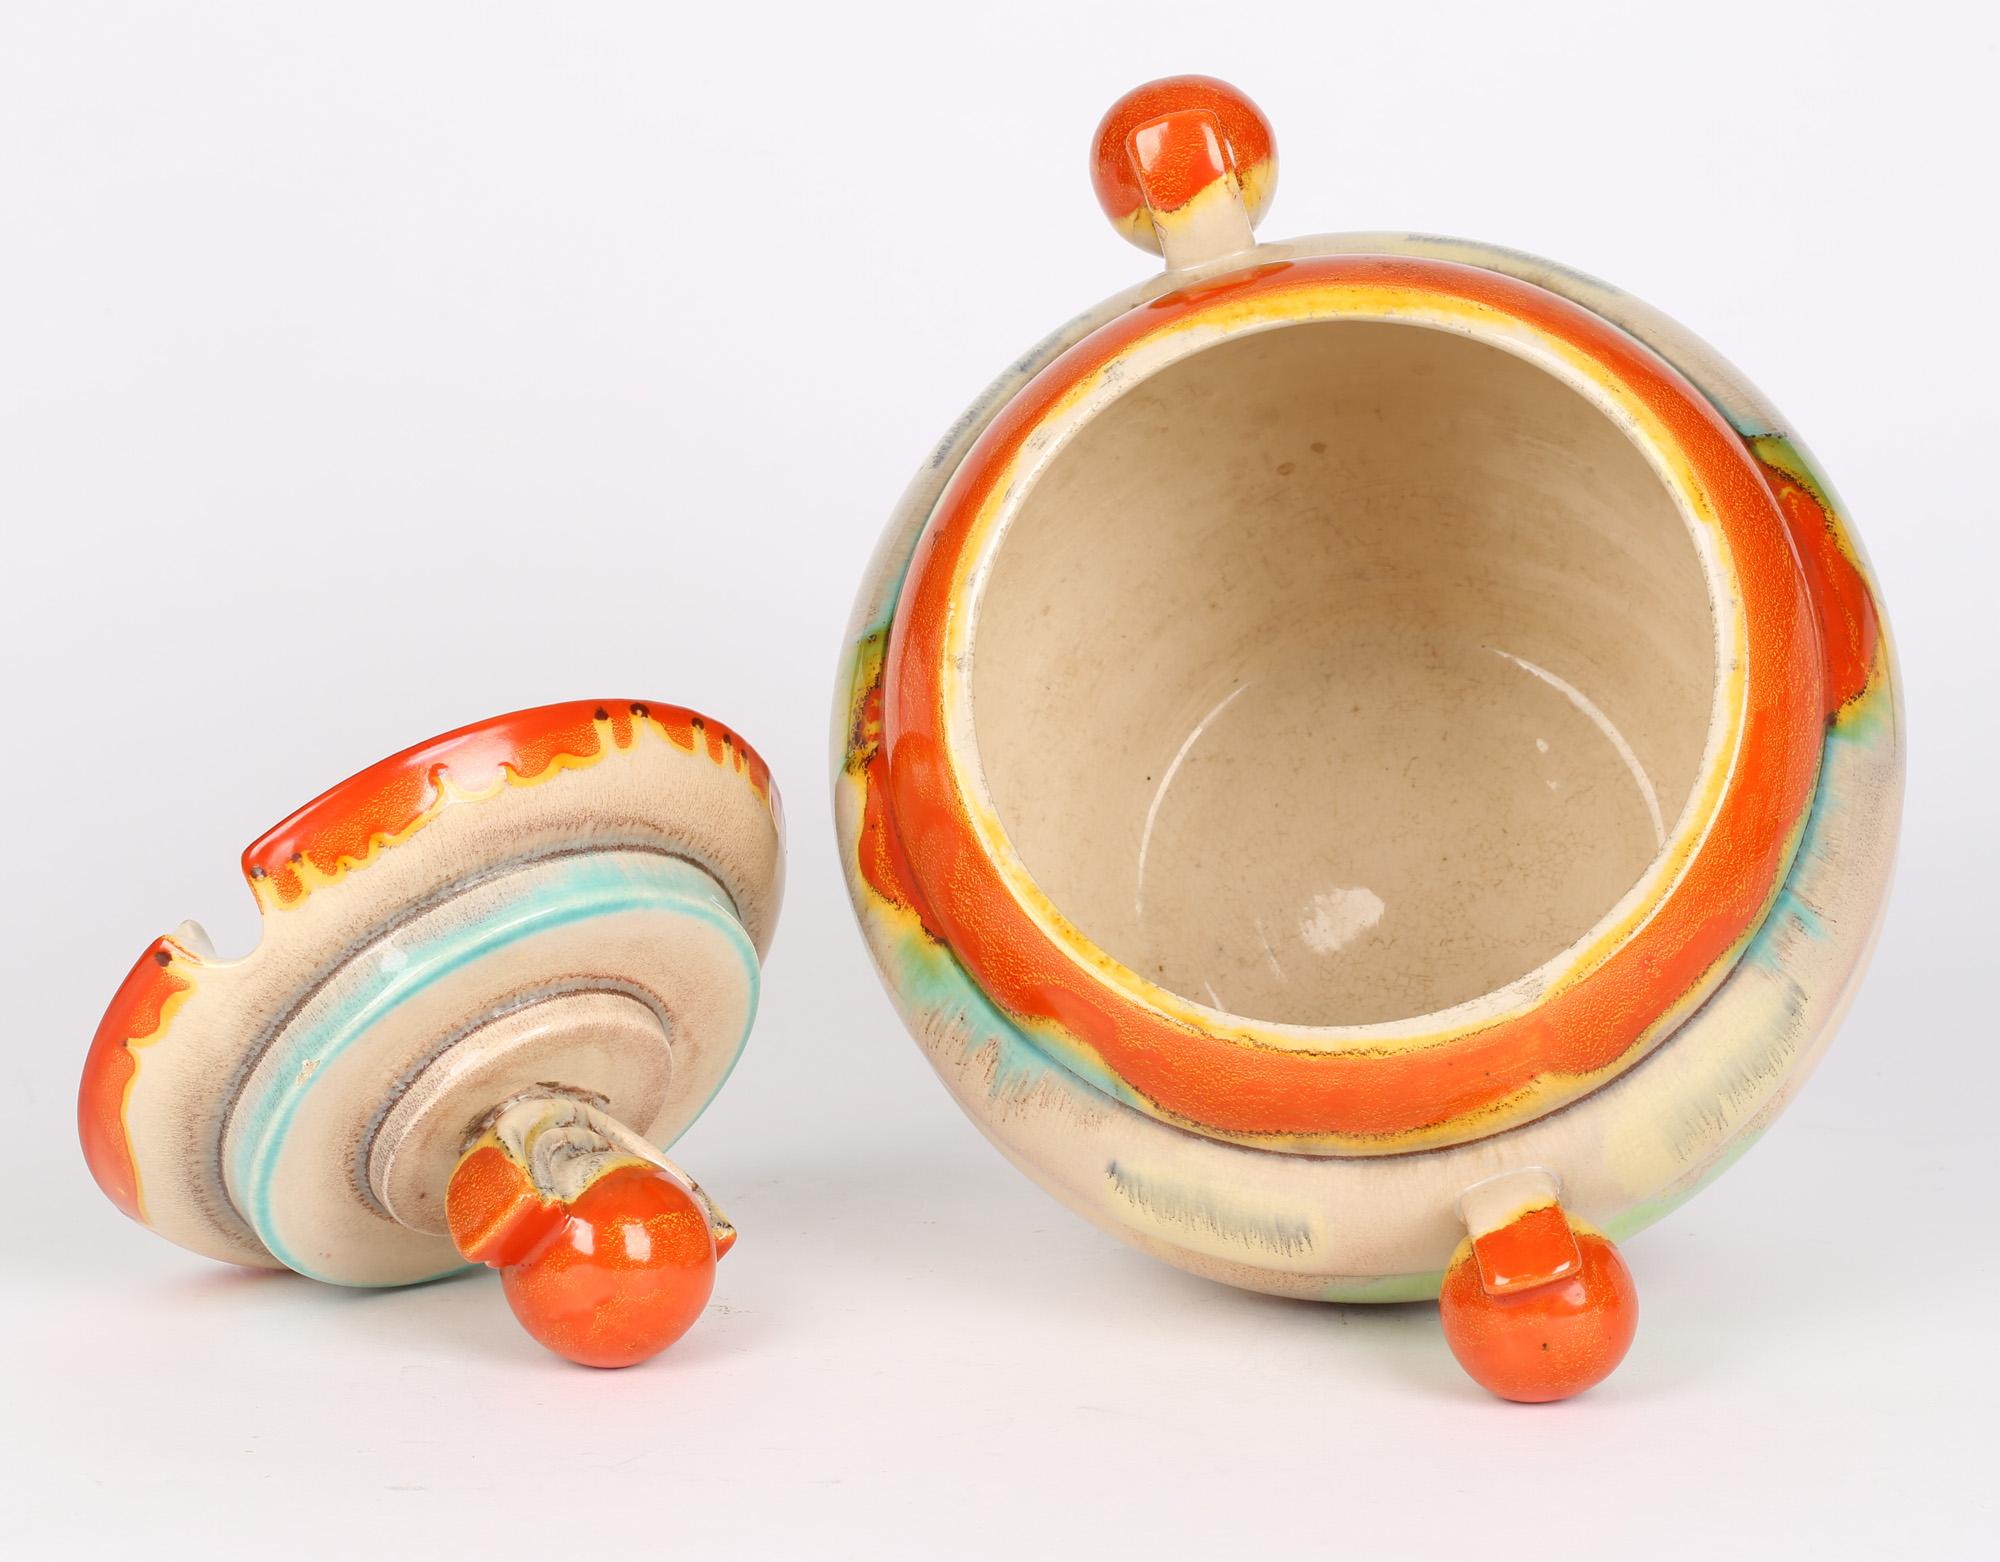 A very stylish Art Deco German pottery lidded punch pot or soup tureen decorated in brightly colored glazes attributed to Dumler & Breiden and dating from around 1930. The large rounded pot stands on a narrow rounded foot and has stylized ball